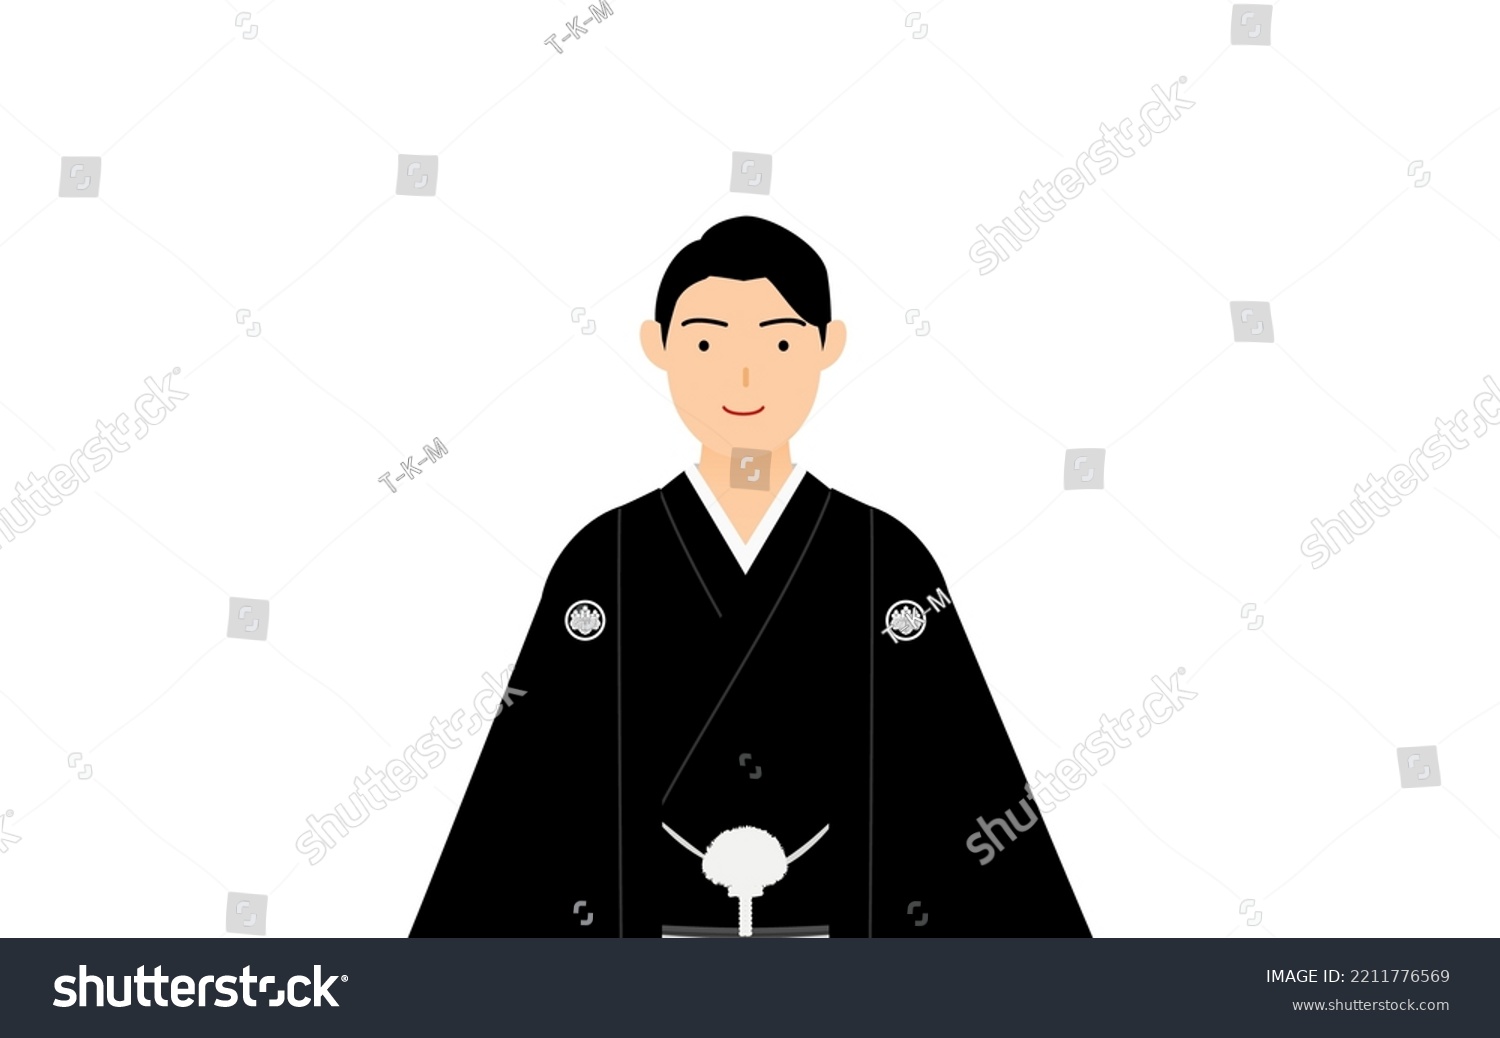 A man in kimono, wearing a crested hakama, Pose - Royalty Free Stock ...